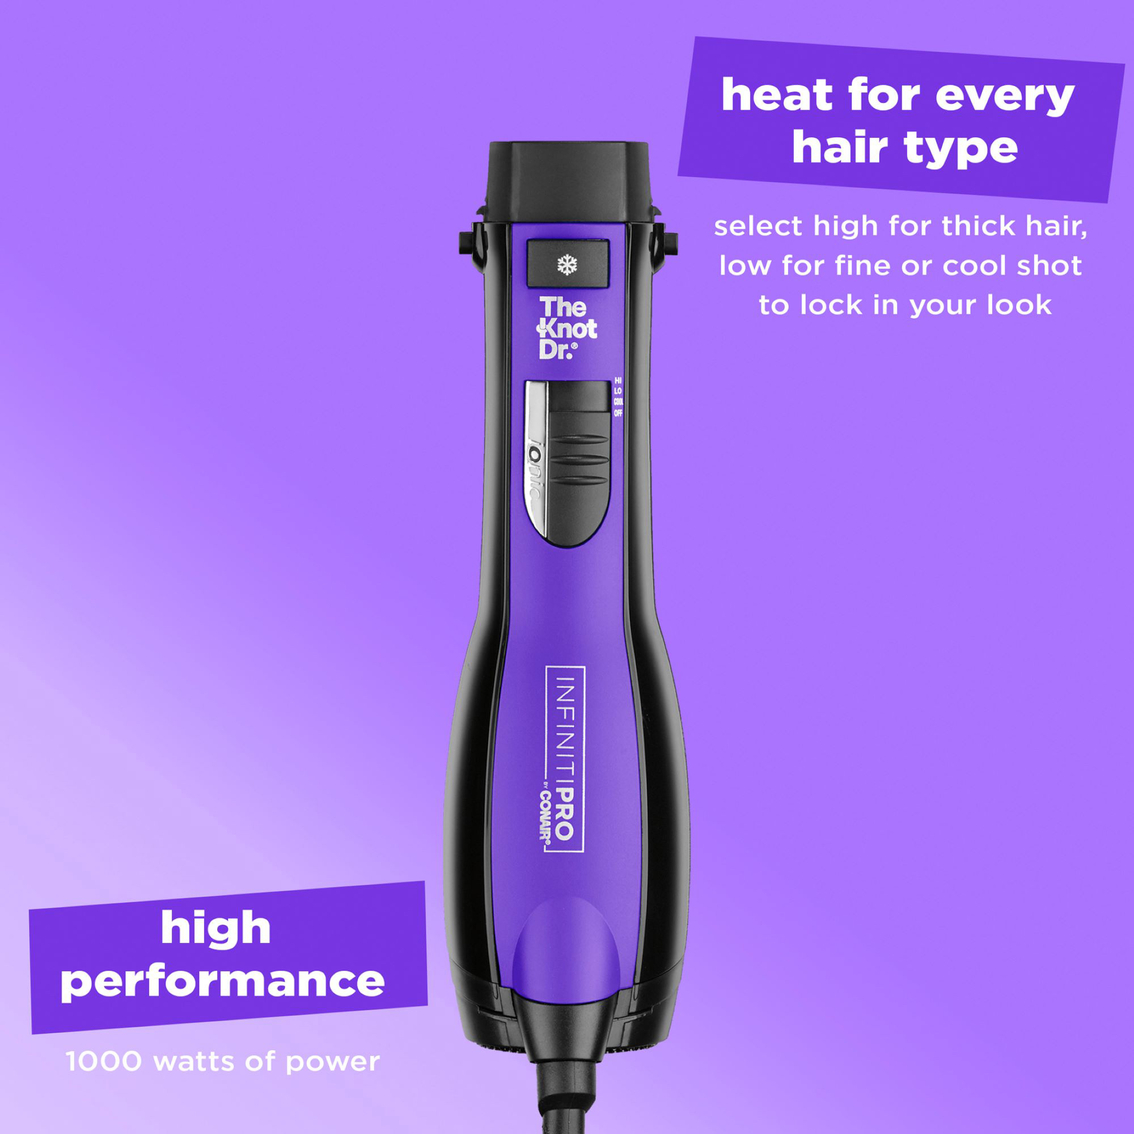 Conair The Knot Dr. Detangling Hot Air Brush - Image 8 of 9